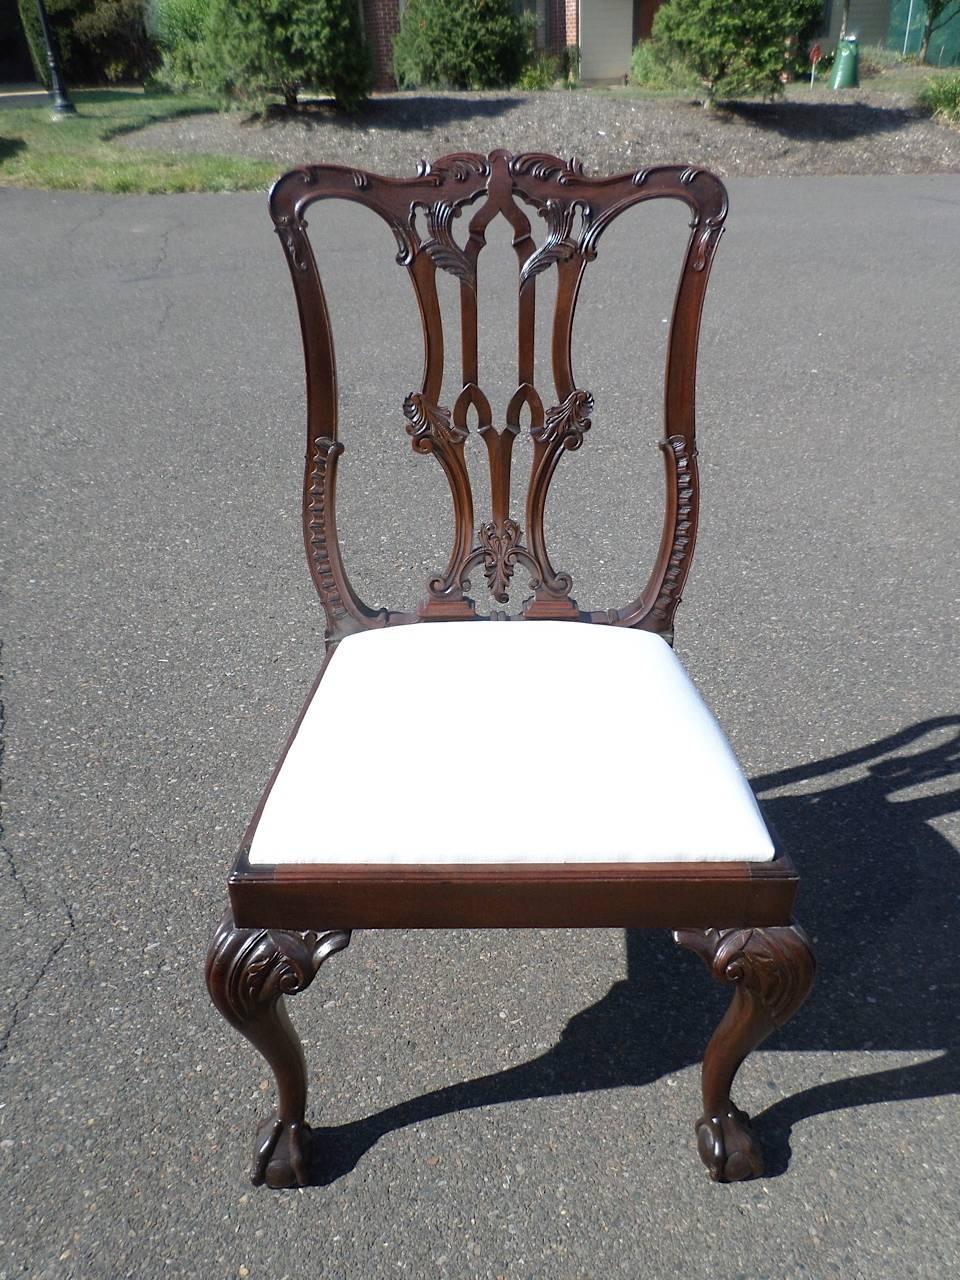 Set of six Chippendale mahogany dining chairs, made by Merryweather & Sons, early 20th century, all marked with a brass plaque on the back seat rail, made of dense, heavy mahogany and beautifully carved cabriole legs ending in ball and claw feet.